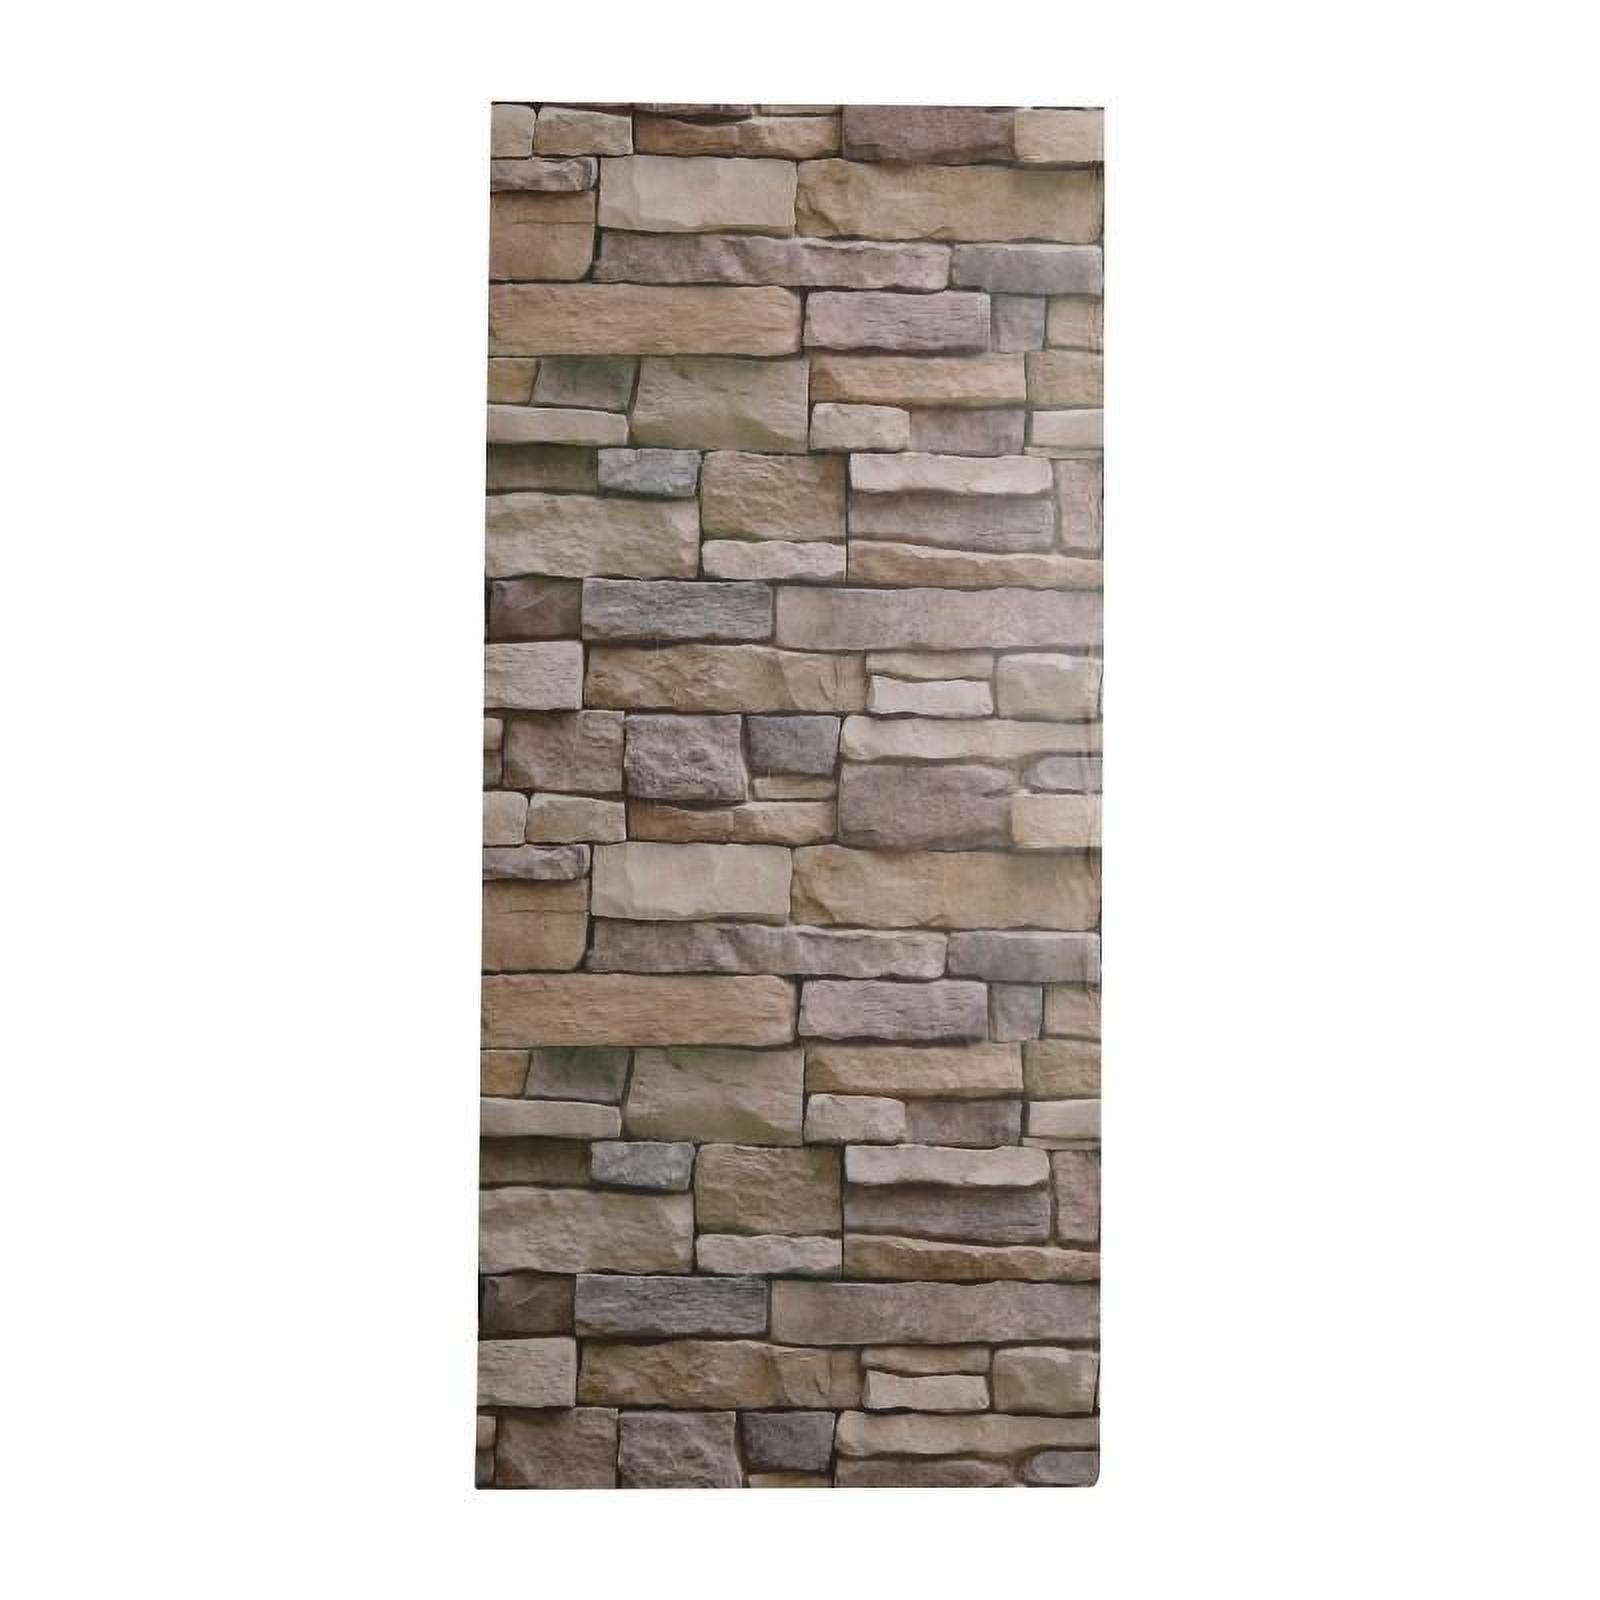 Keimprove 3D Brick Wall Stickers Self-Adhesive PVC Wallpaper Peel and Stick 3D Art Wall Panels for Living Room Bedroom Background Wall Decoration,Wall Panels Peel and Stick Wallpaper - image 1 of 7